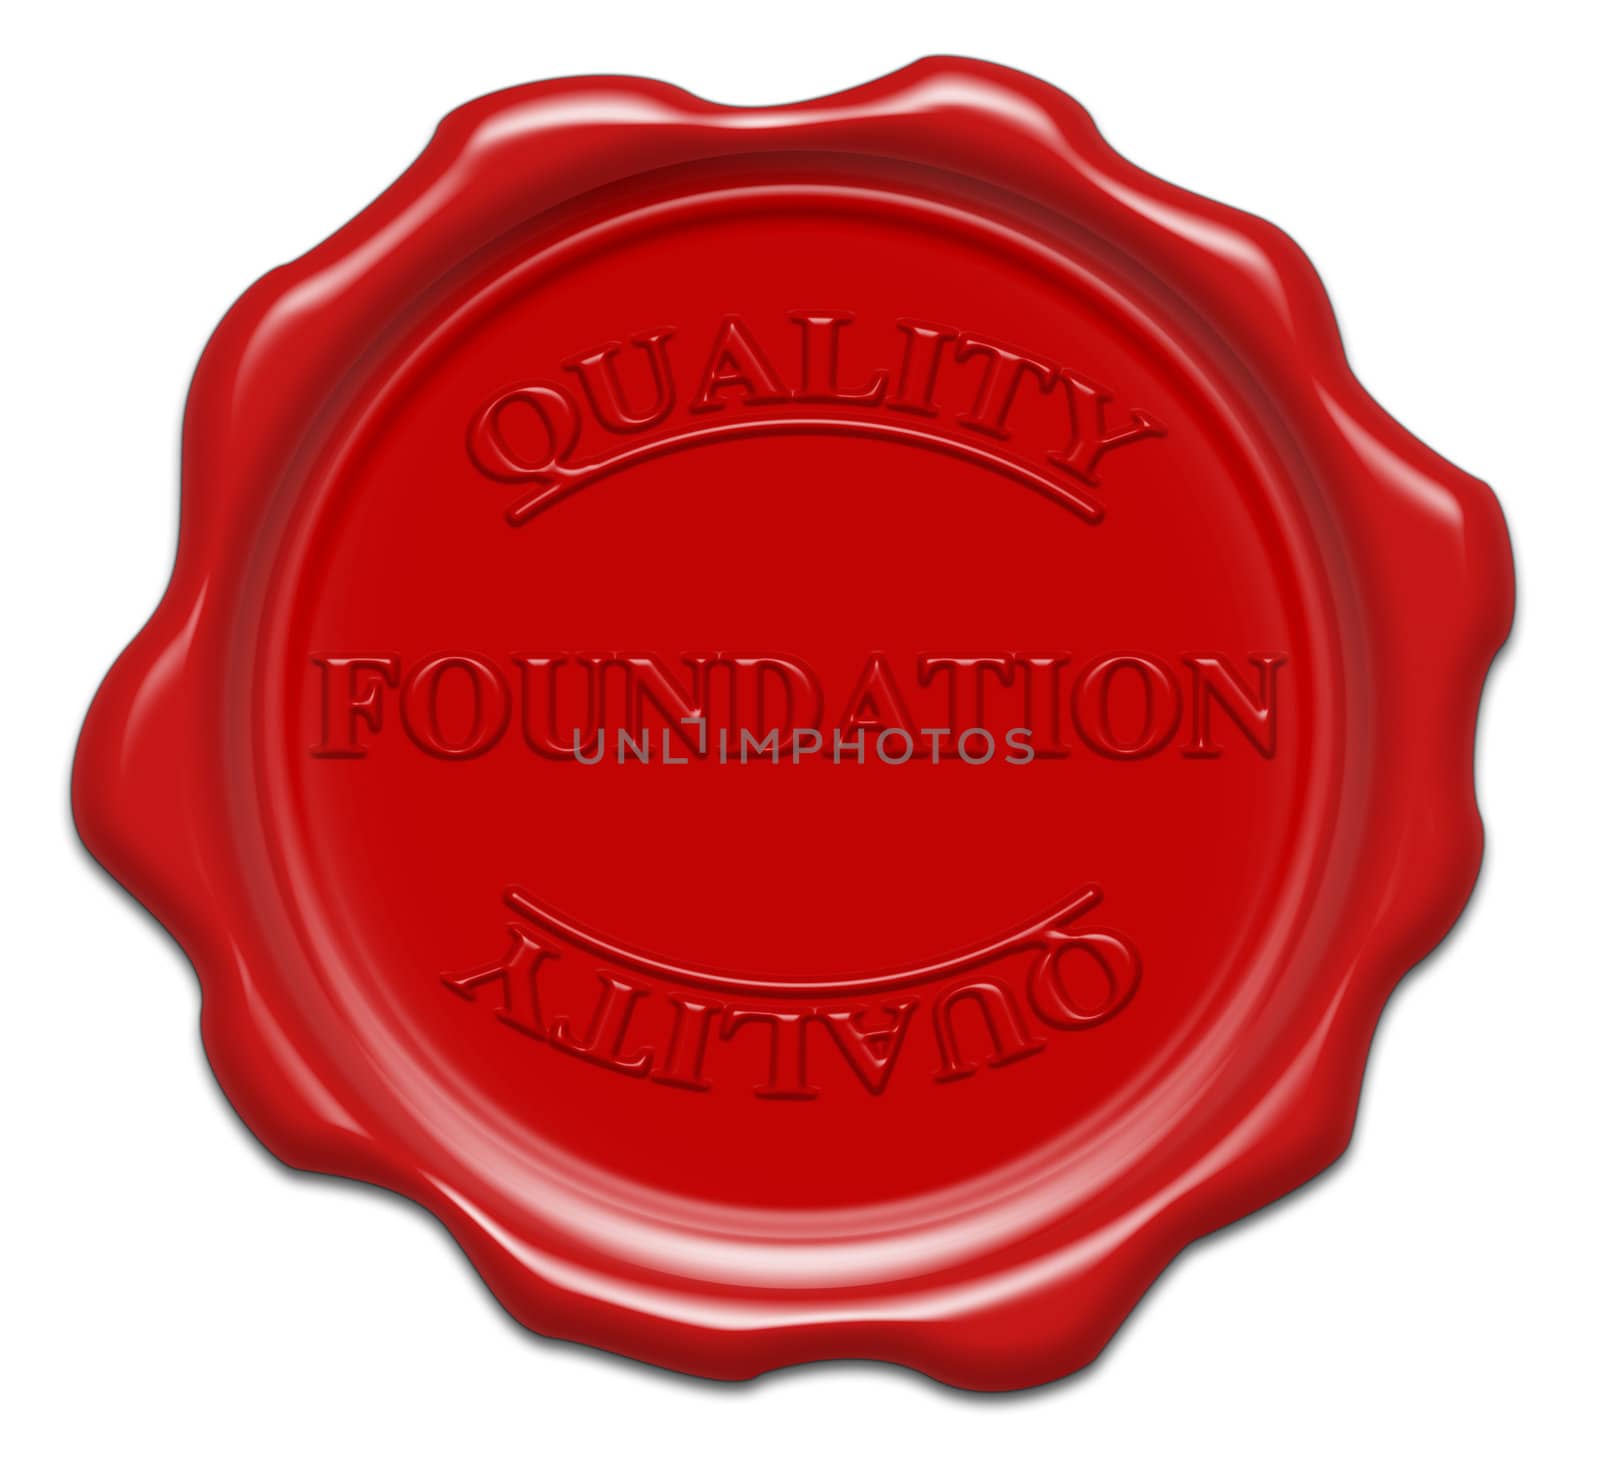 quality foundation - illustration red wax seal isolated on white background with word : foundation